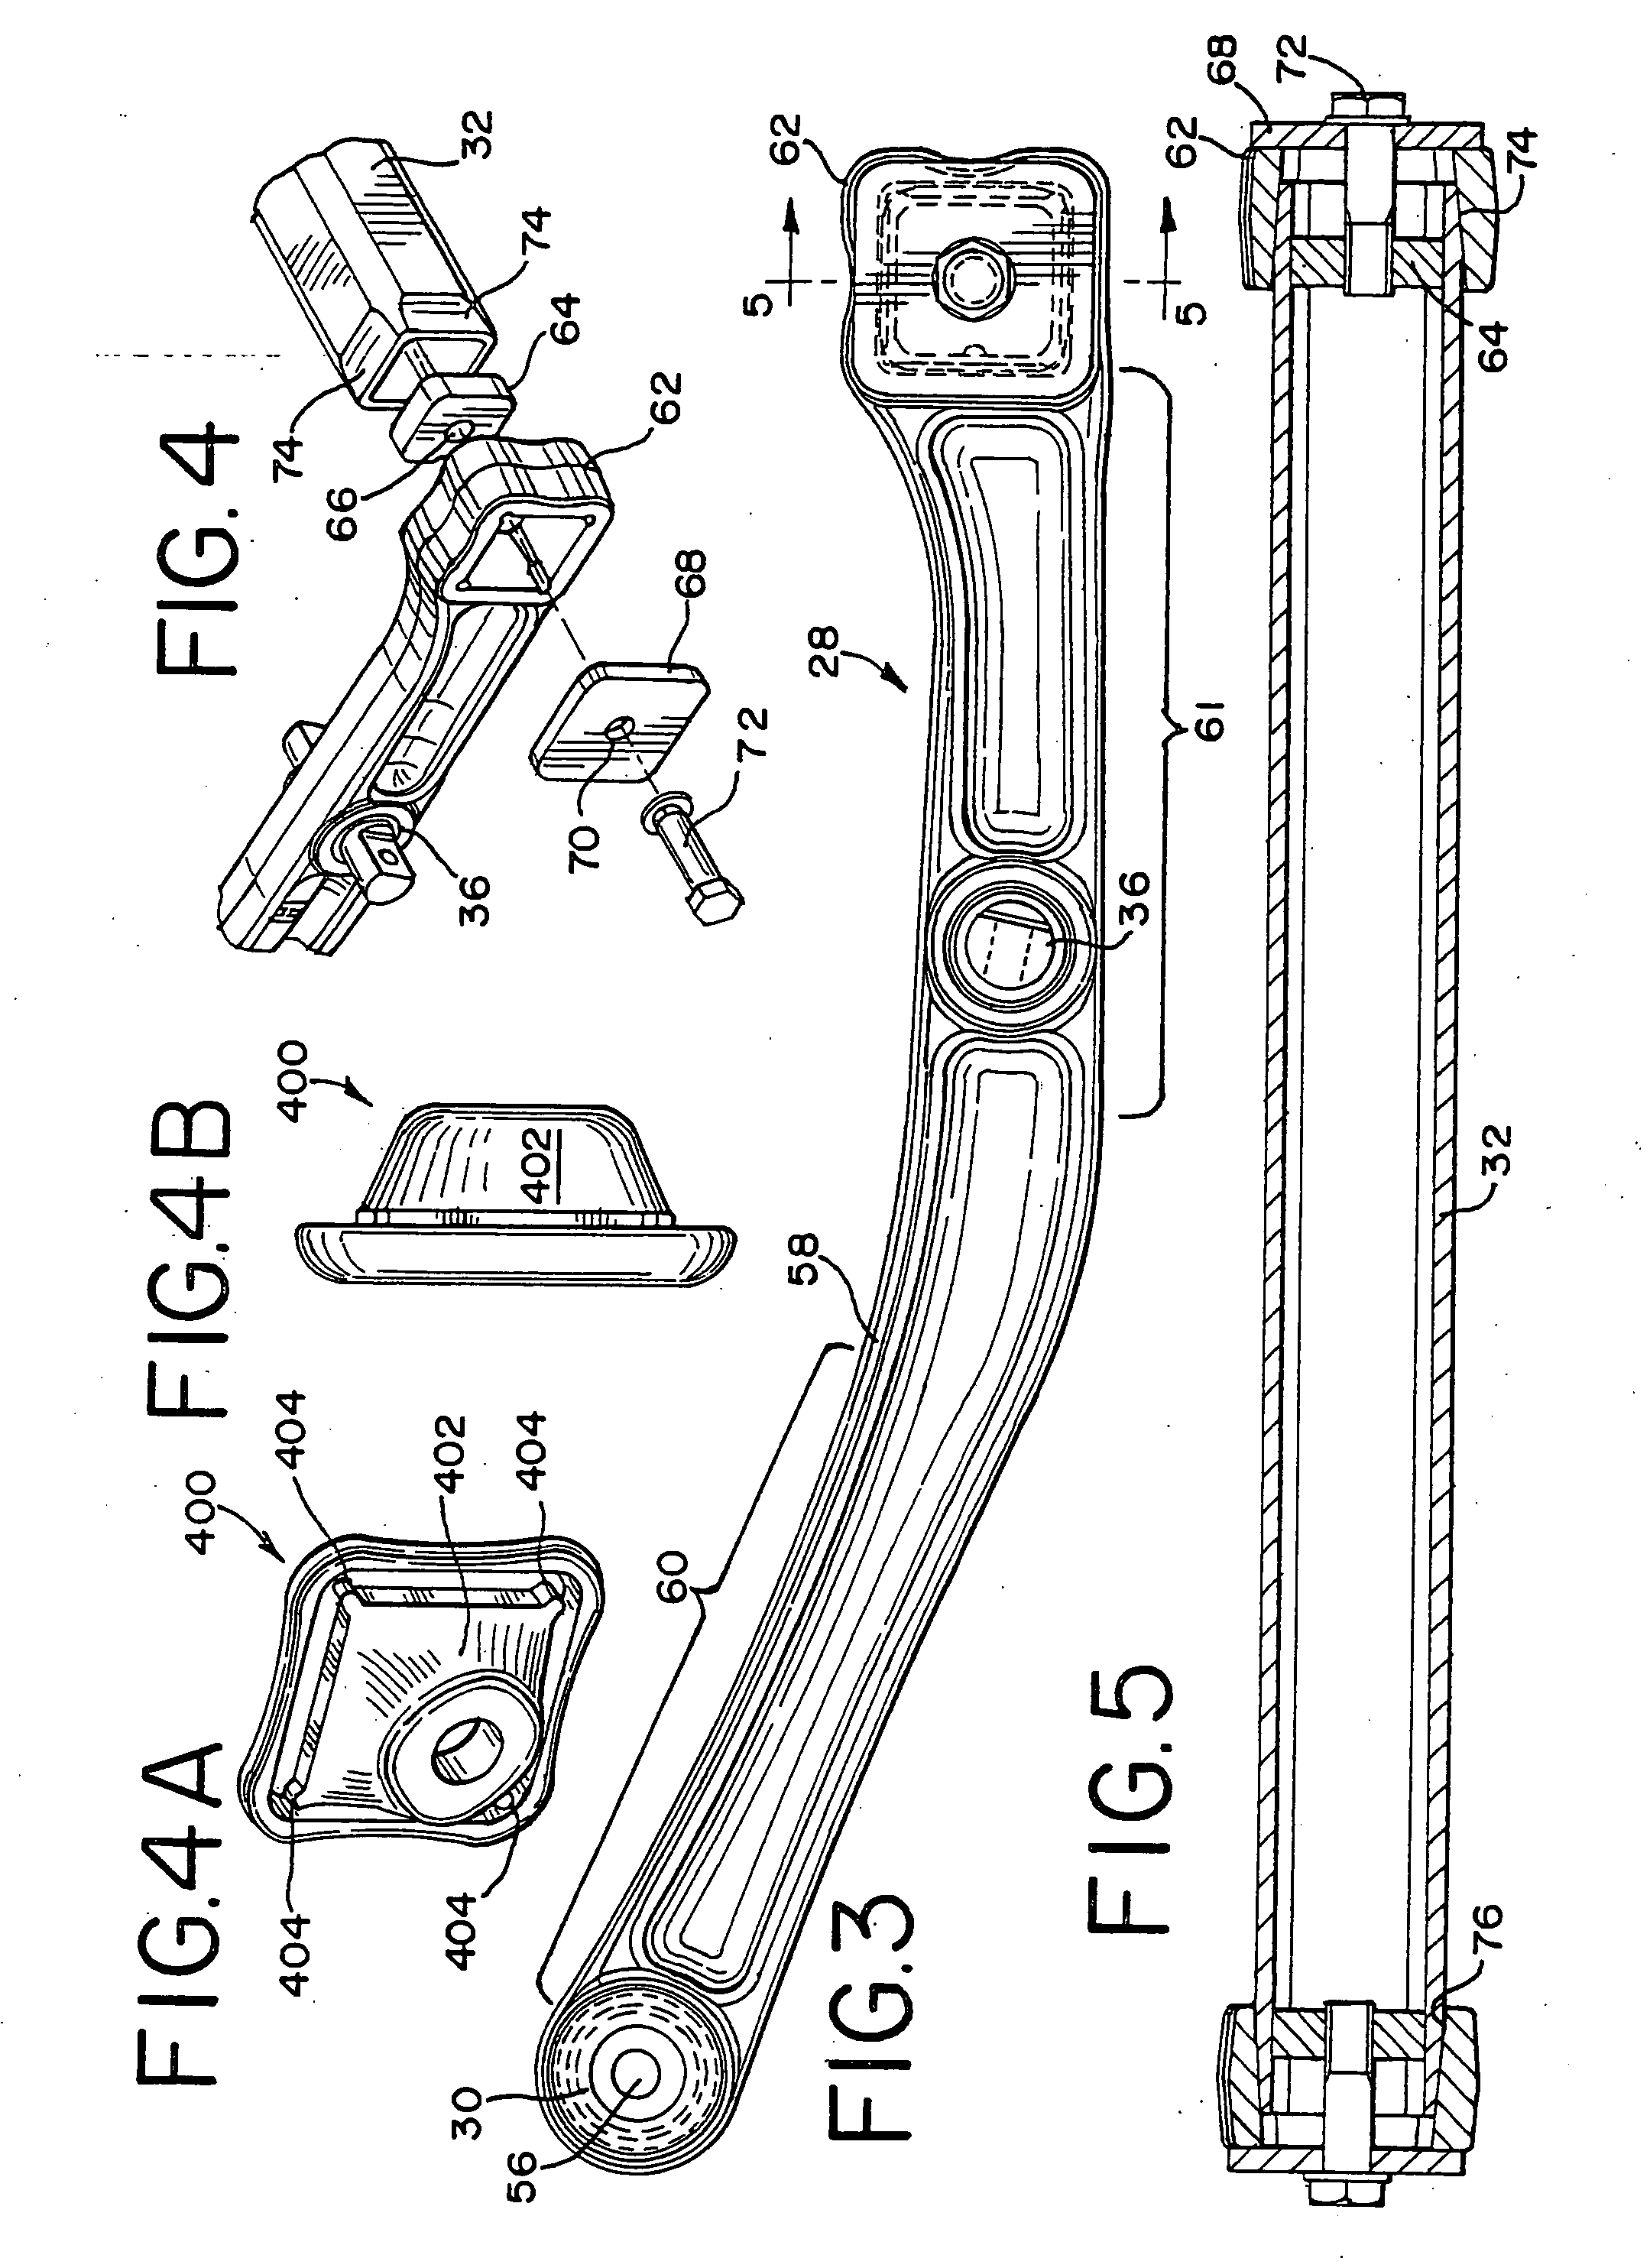 Axle clamp assembly top pad and suspensions incorporating same